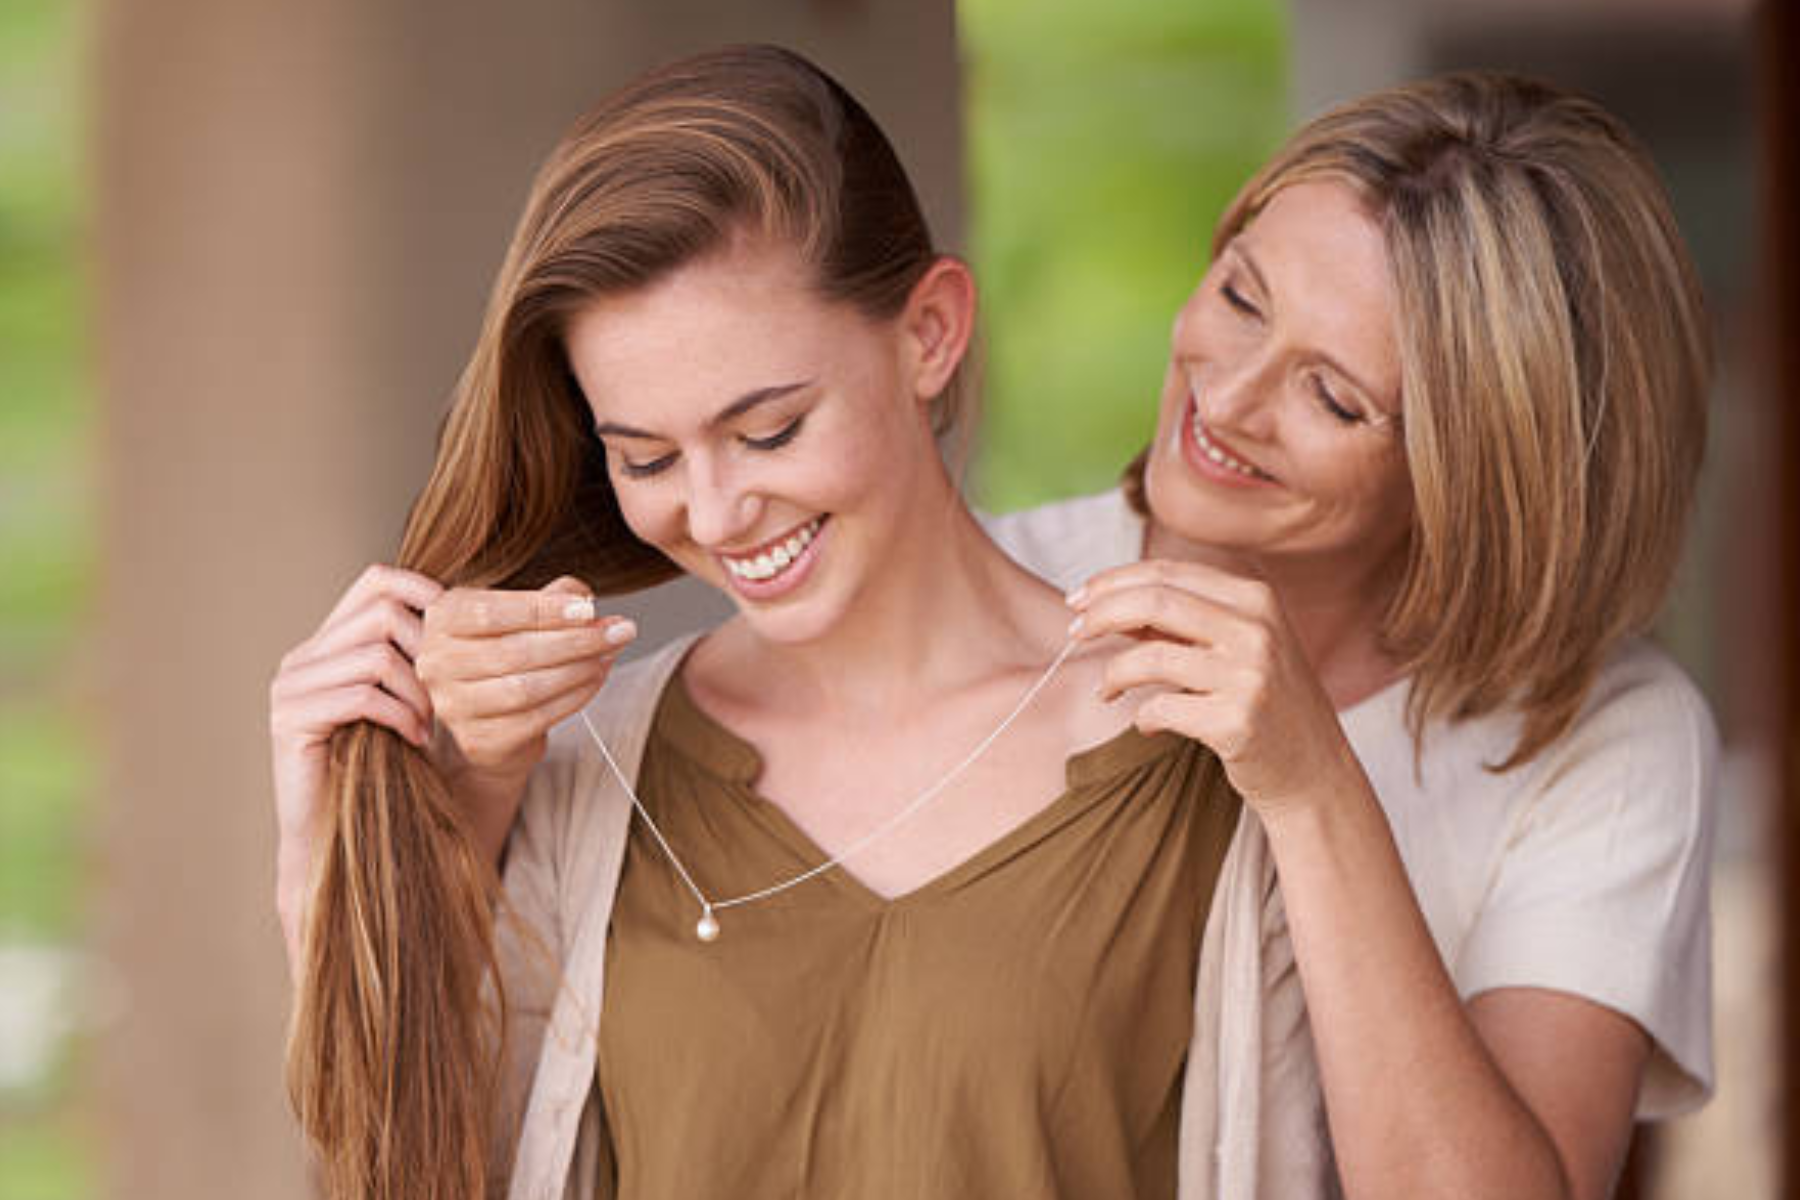 Gold Jewelry For Mother And Daughter - Celebrate The Special Bond